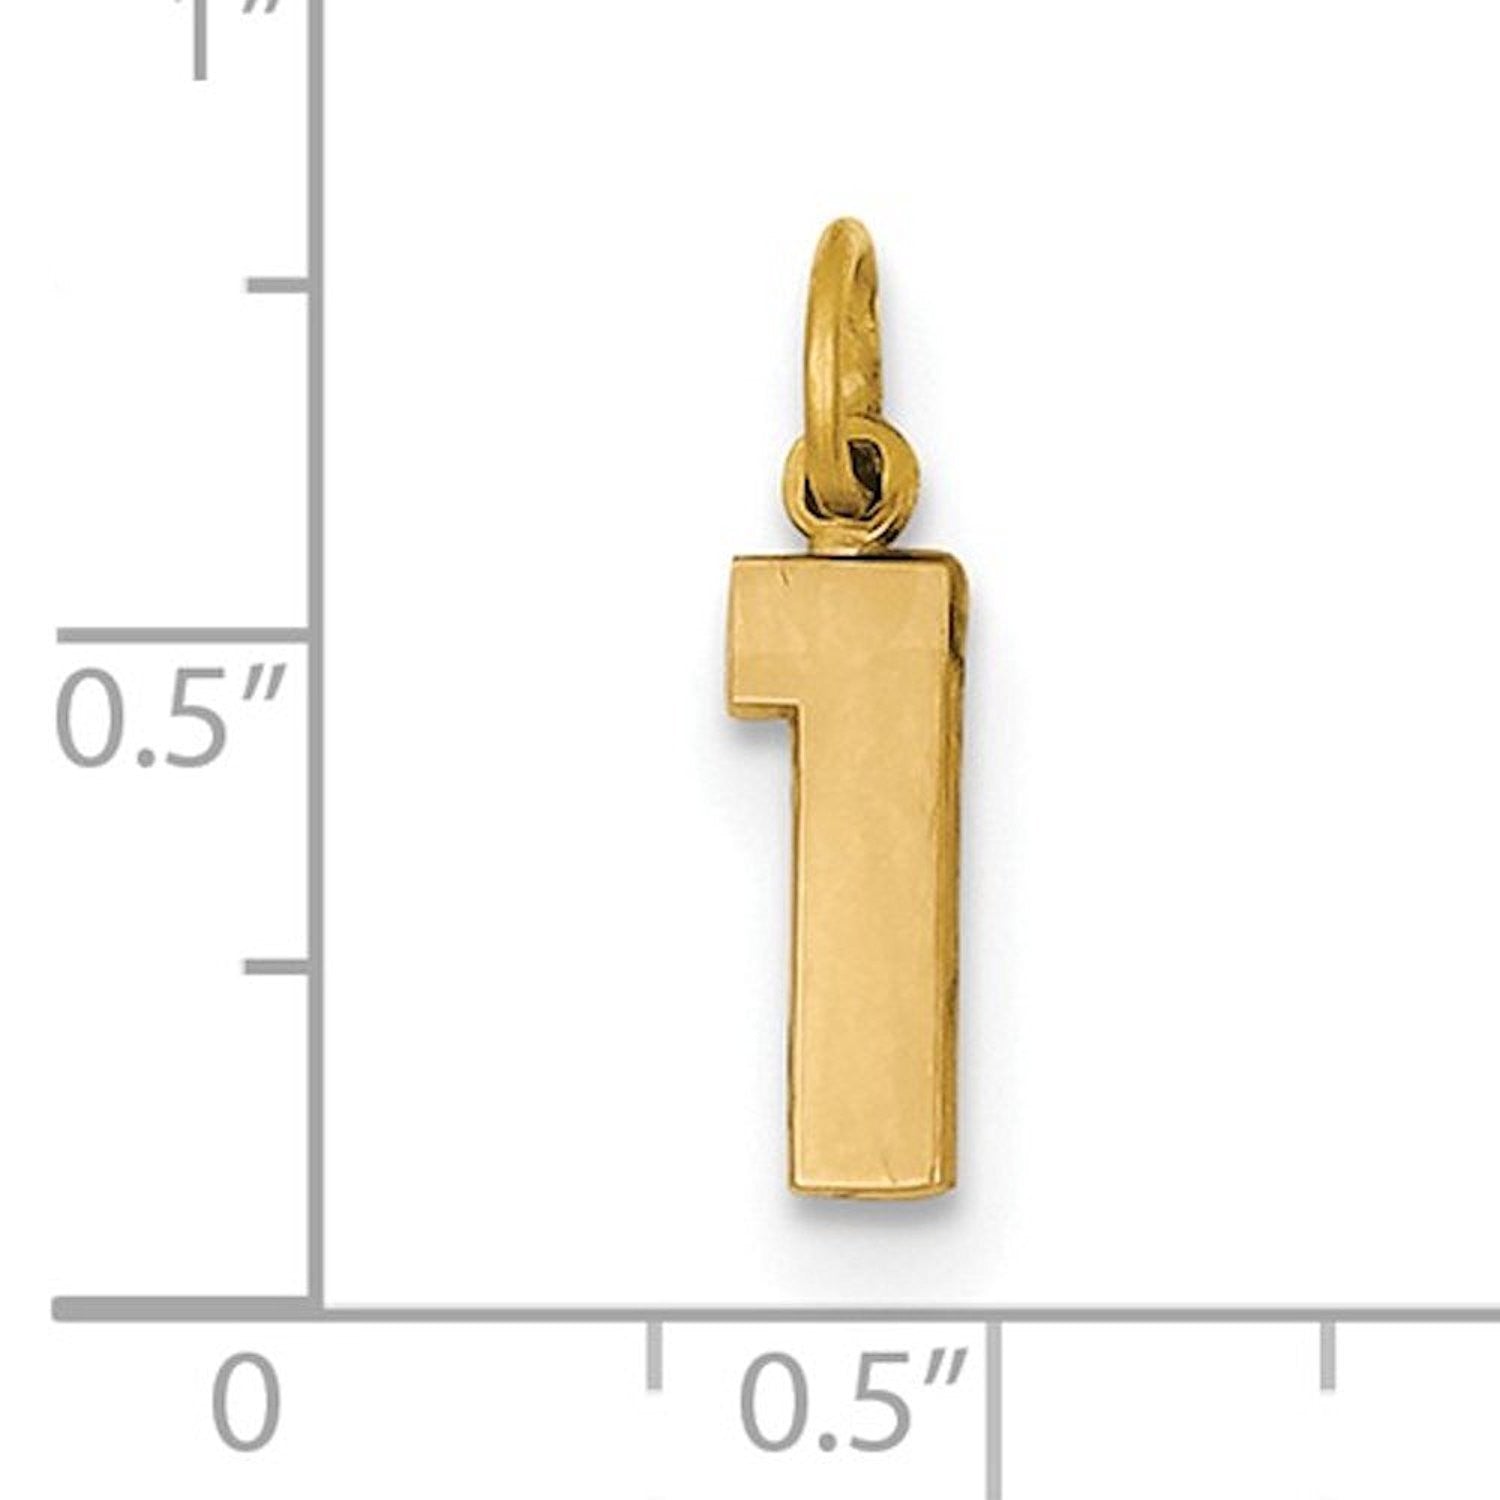 14k Yellow Gold Number 1 One Pendant Charm